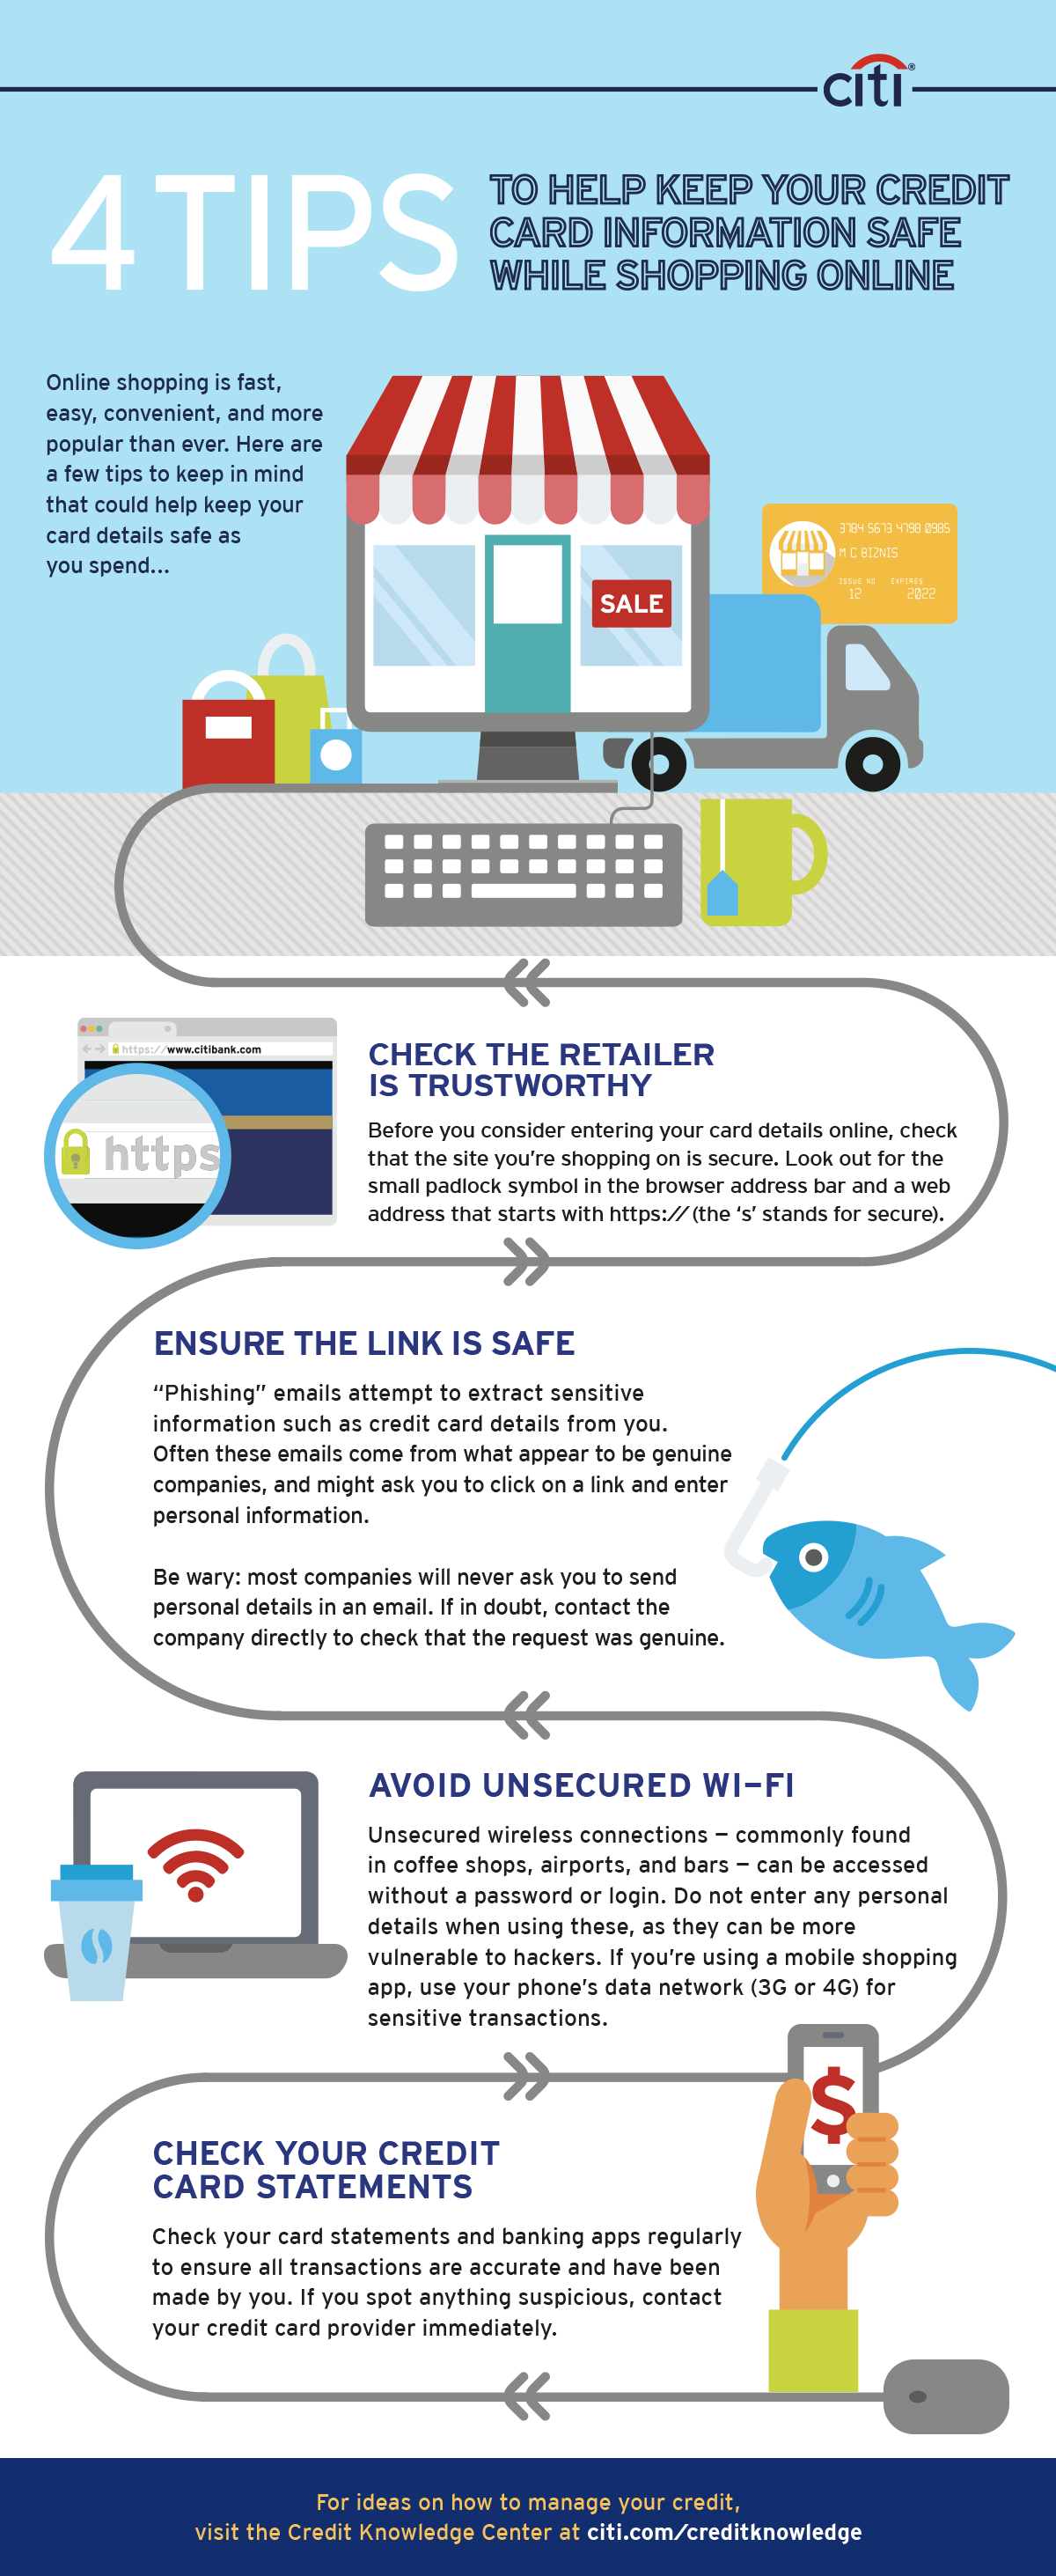 How to protect your credit card information with safe online shopping tips